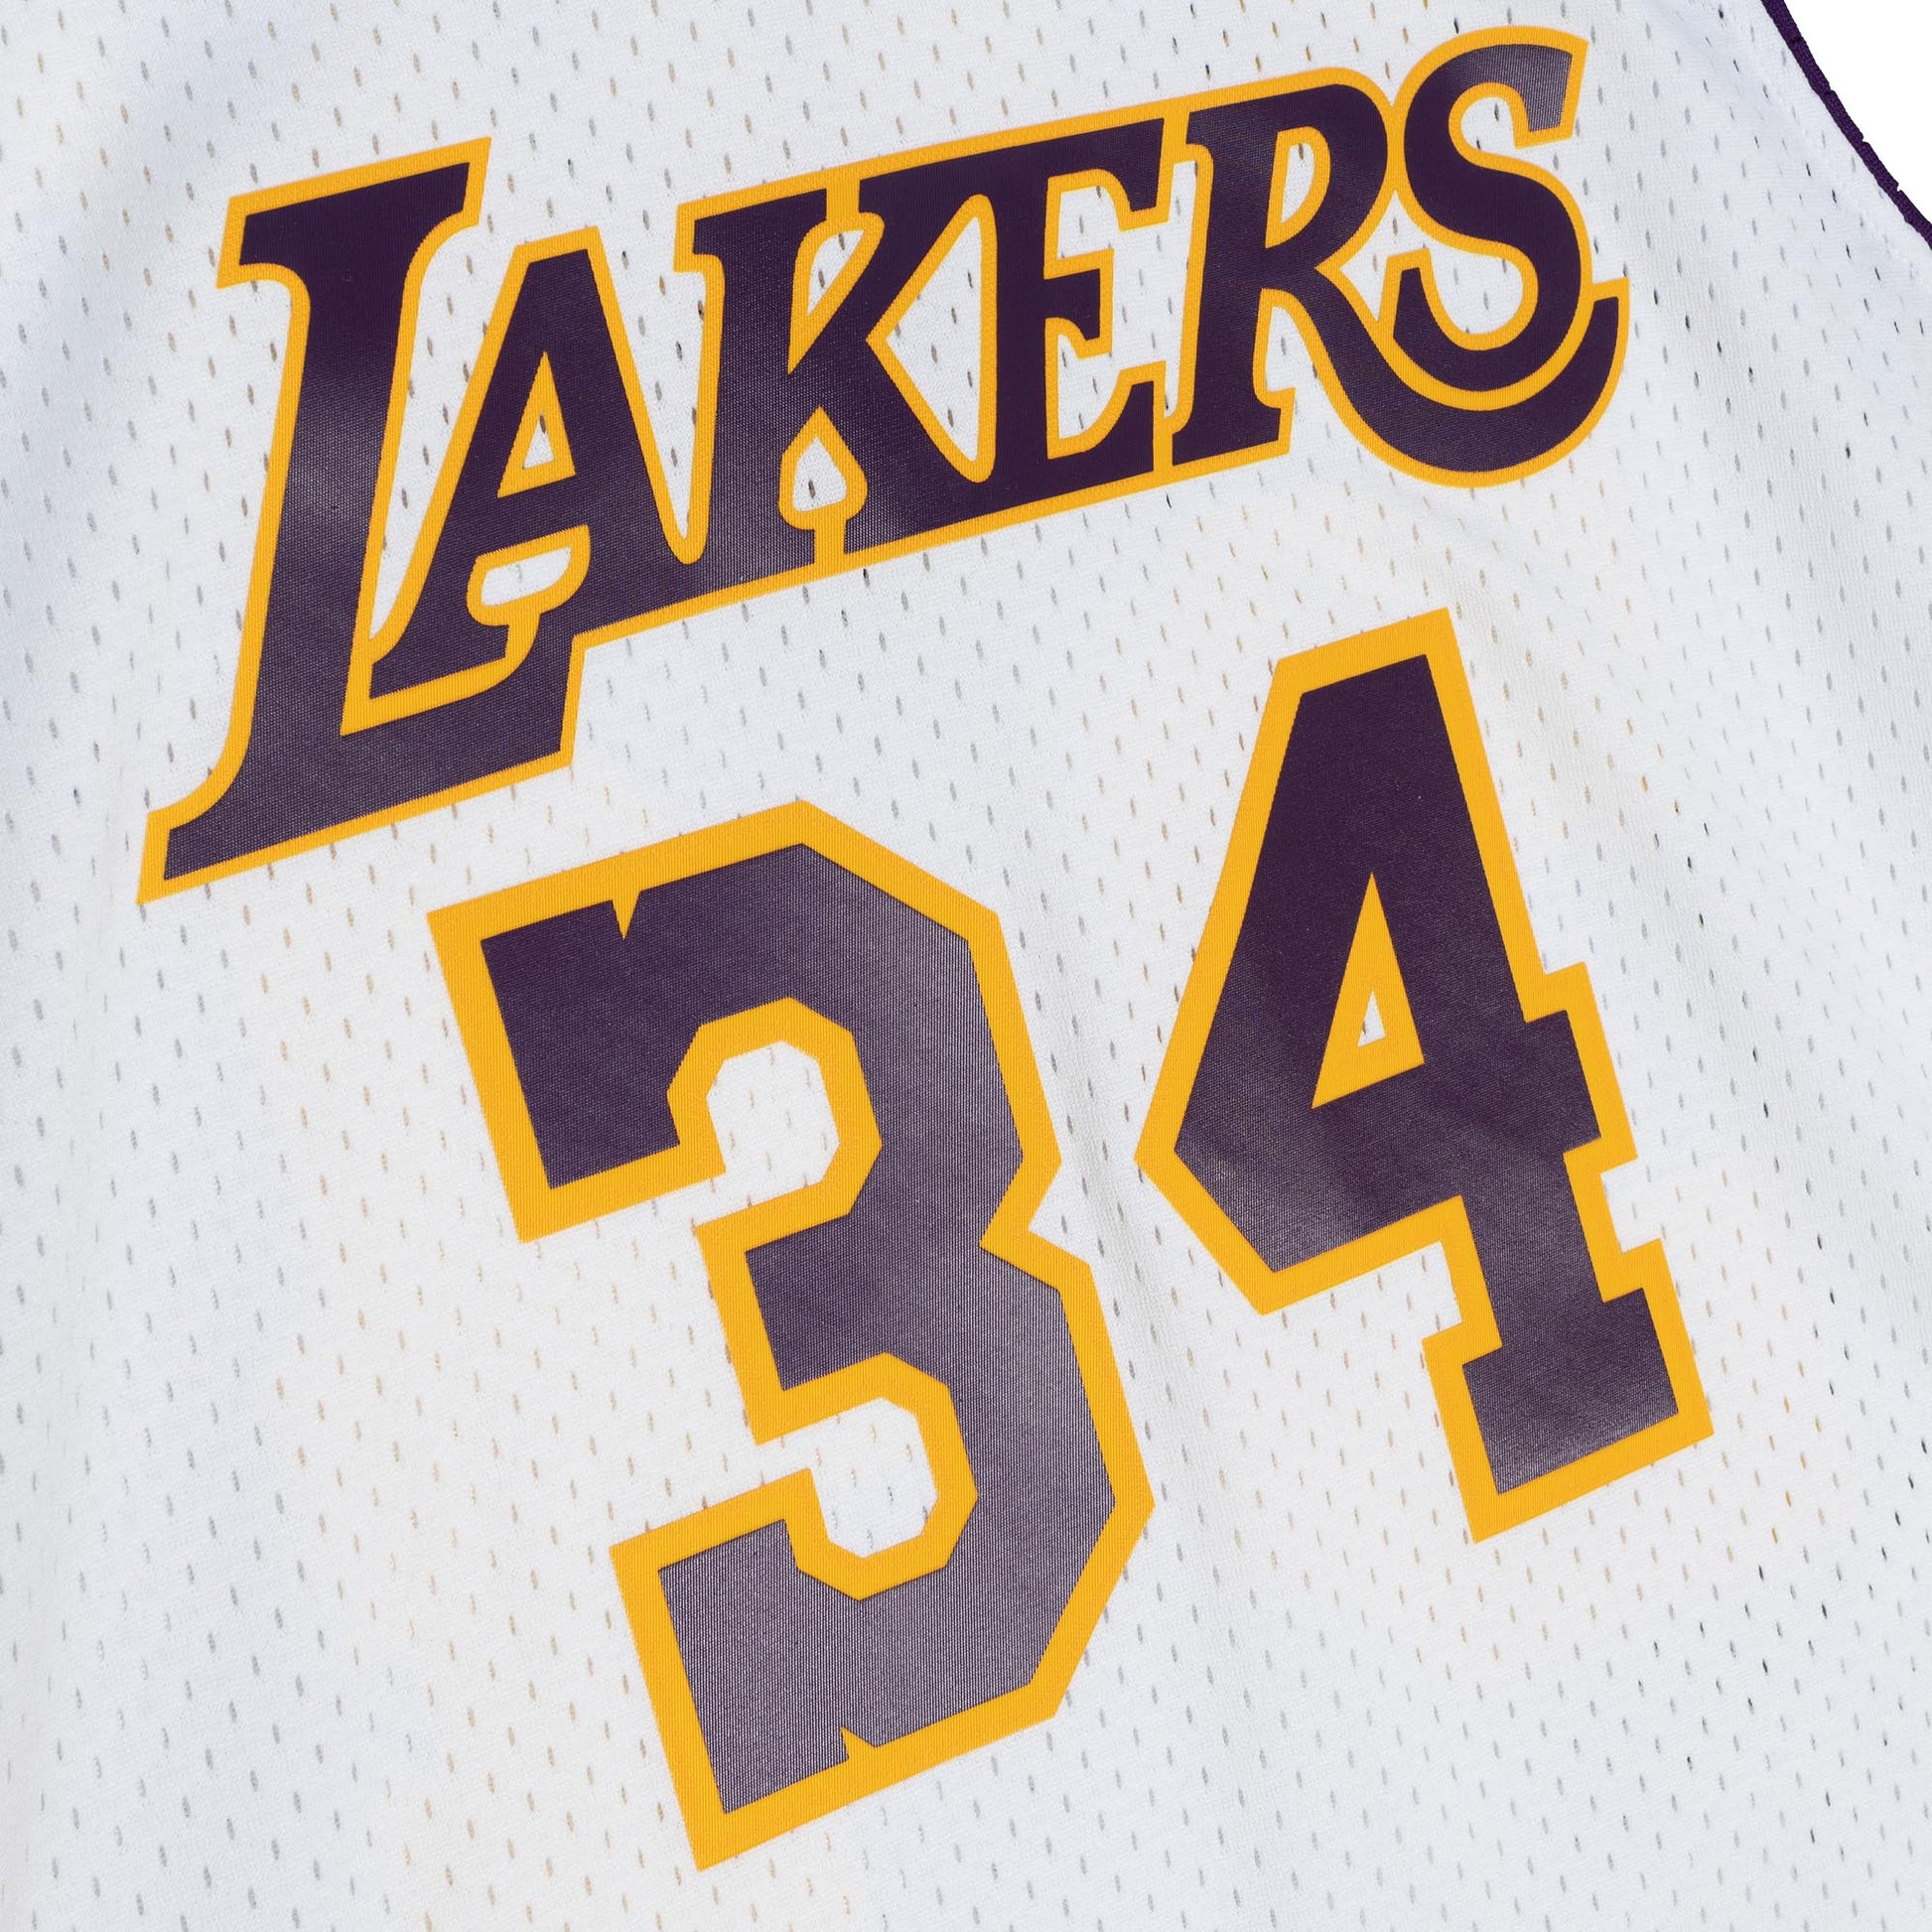 Swingman Jersey  Shaquille O'Neal 02 - Los Angeles Lakers White